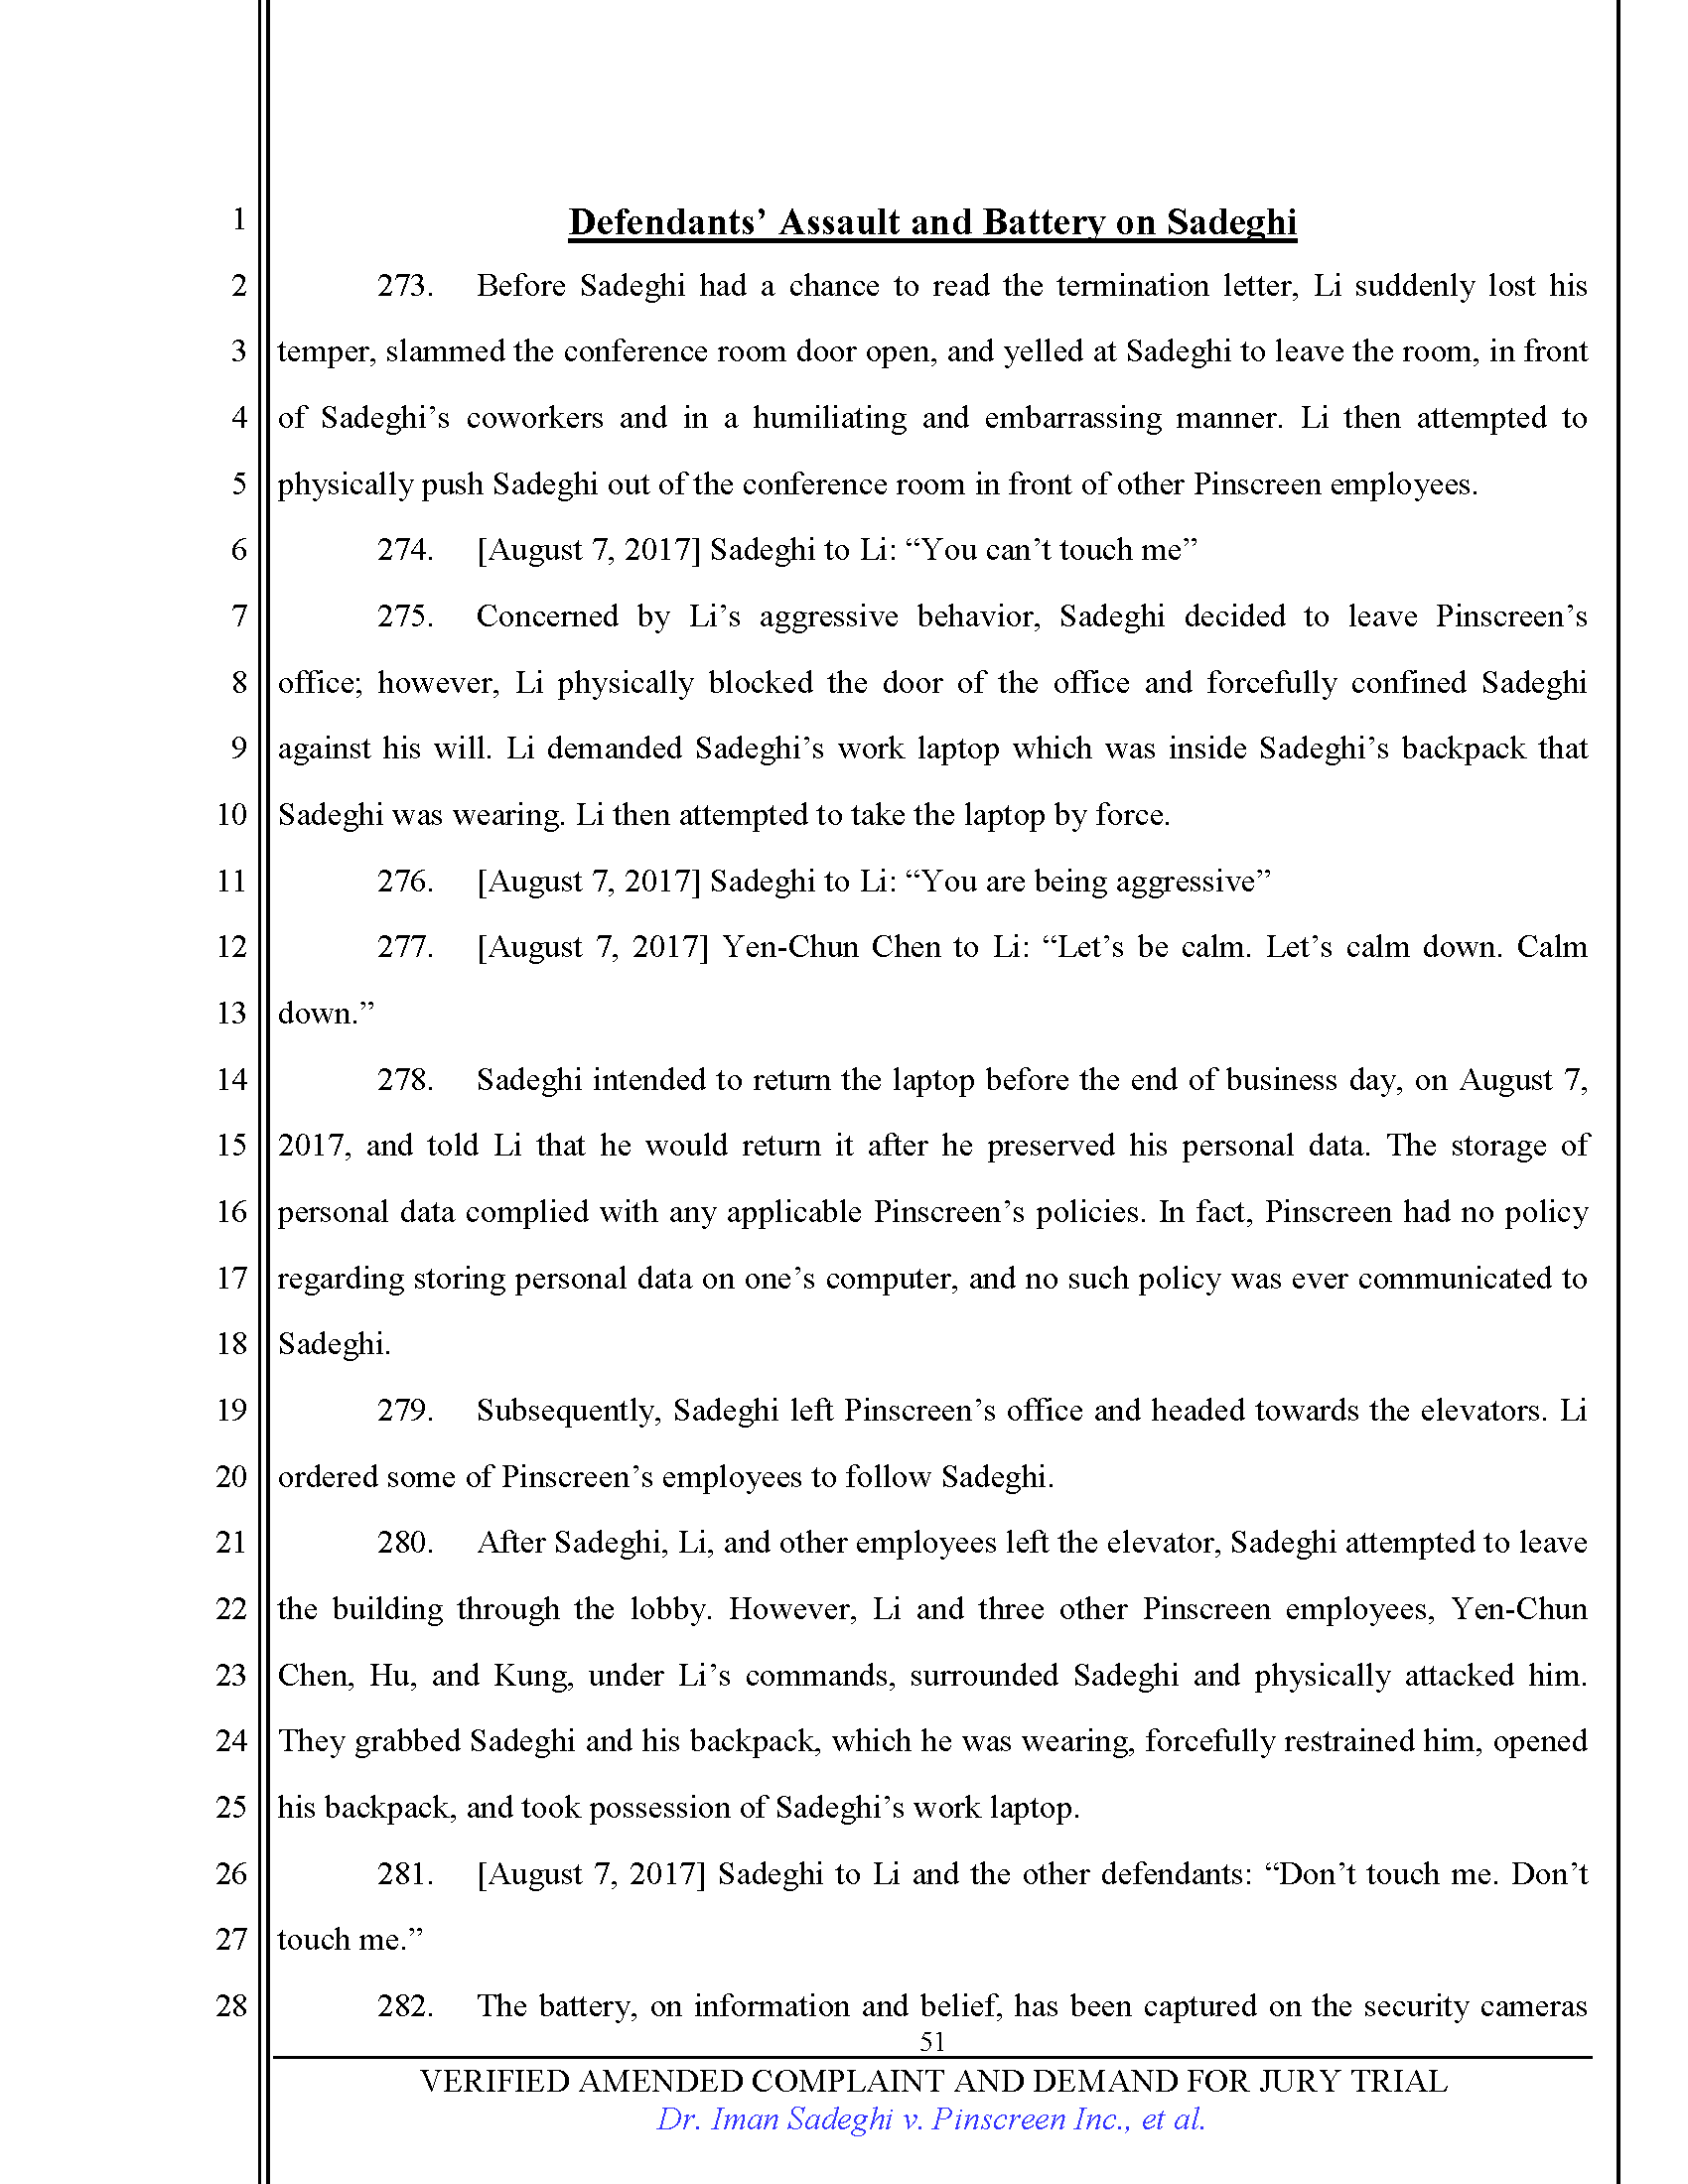 First Amended Complaint (FAC) Page 51